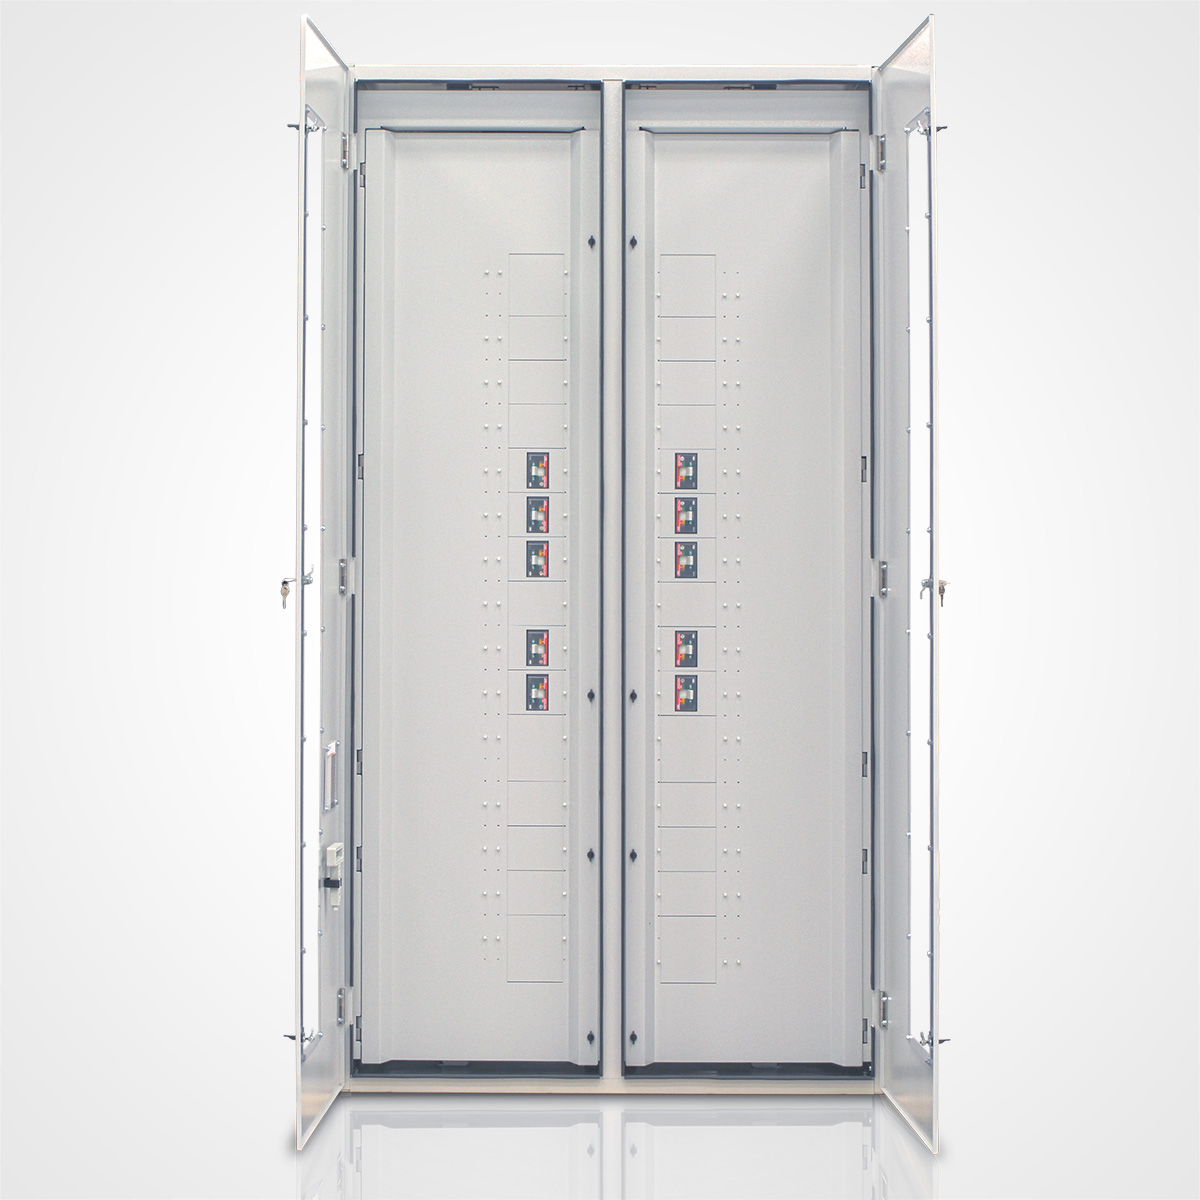 The LayerZero Series 70: ePanel-HD2 High Density Power Panel with the Outer Doors Open.